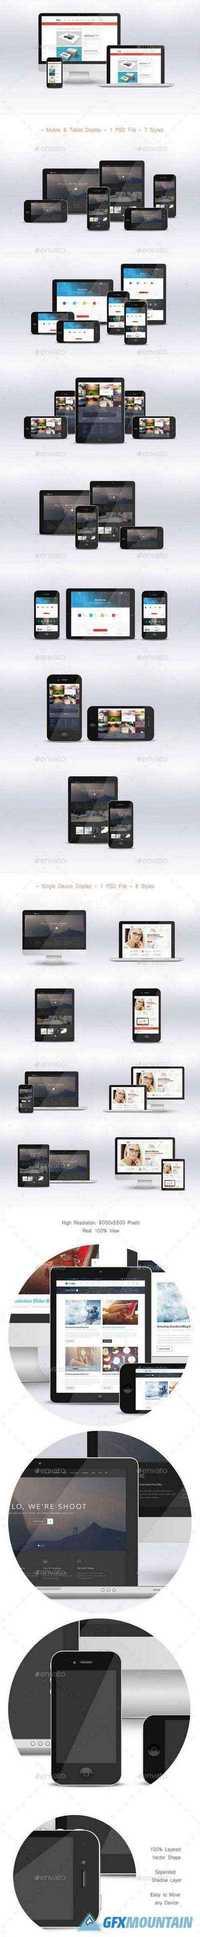 GraphicRiver - 11759804 Responsive Devices Mock-ups